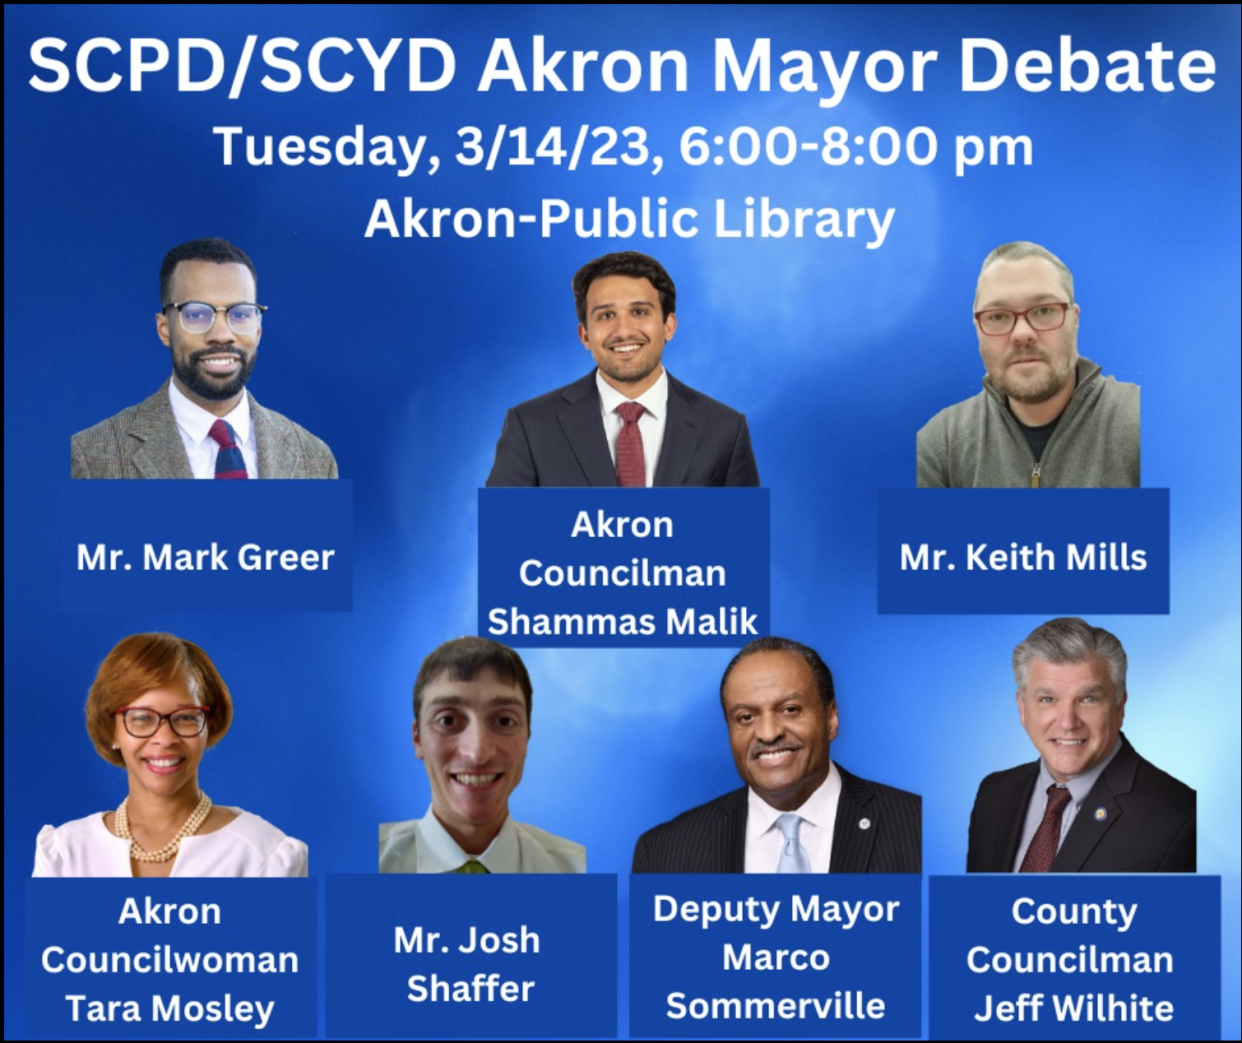 Akron mayoral candidate debate hosted by Summit County Progressive Democrats and Summit County Young Democrats.